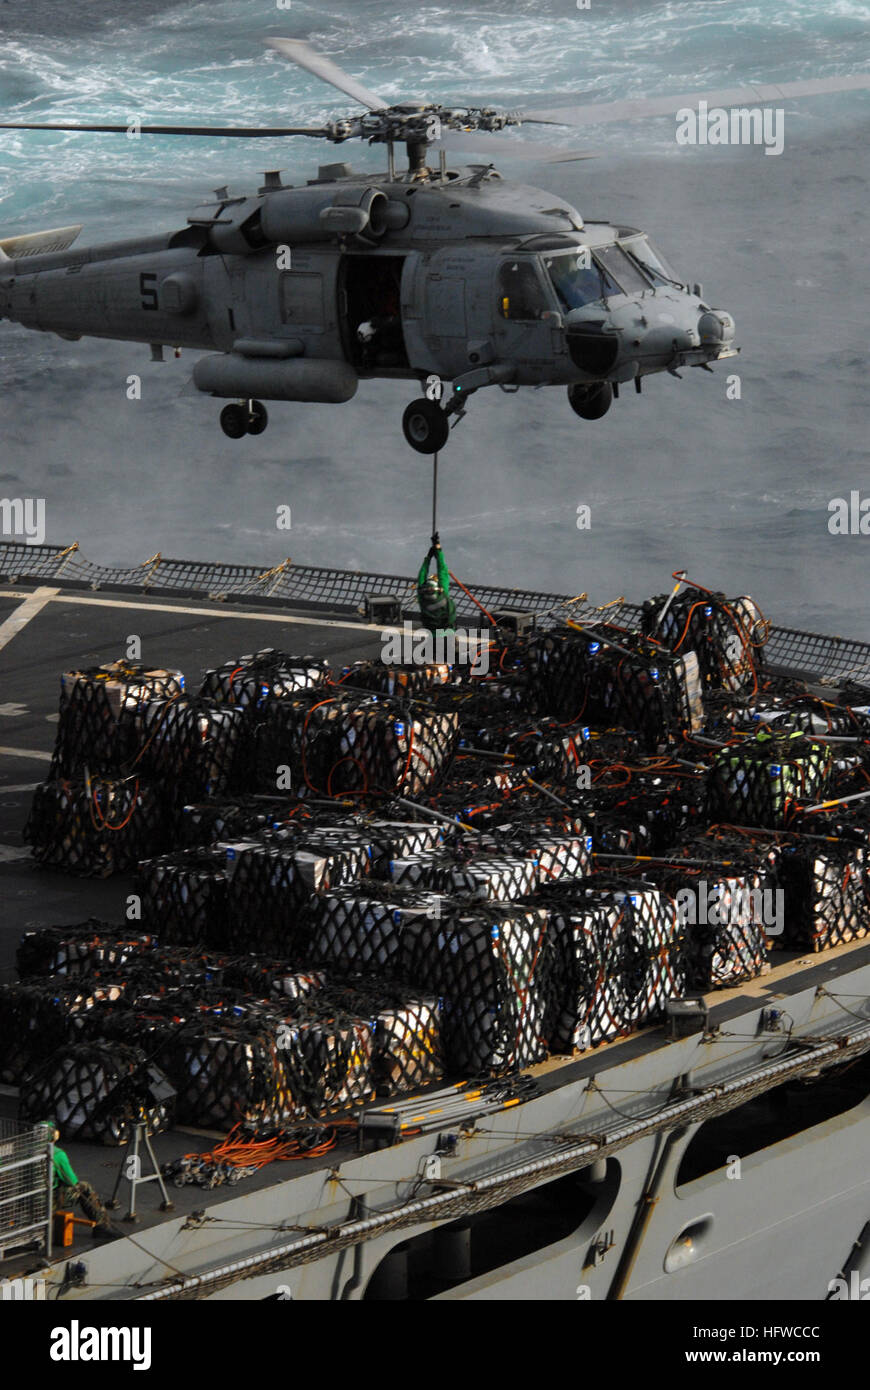 090820-N-5586R-046 GULF OF OMAN (Aug. 20, 2009) An MH-60S Sea Hawk helicopter assigned to the Blackjacks of Helicopter Sea Combat Squadron (HSC) 21 is loaded with cargo from the Military Sealift Command fast-combat support ship USNS Rainier (T-AOE 7) for delivery to the aircraft carrier USS Ronald Reagan (CVN 76) during a replenishment at sea. Ronald Reagan is deployed to the U.S. 5th Fleet area of responsibility. (U.S. Navy photo by Mass Communication Specialist Seaman Apprentice Amanda L. Ray/Released) US Navy 090820-N-5586R-046 An MH-60S Sea Hawk helicopter assigned to the Blackjacks of Hel Stock Photo